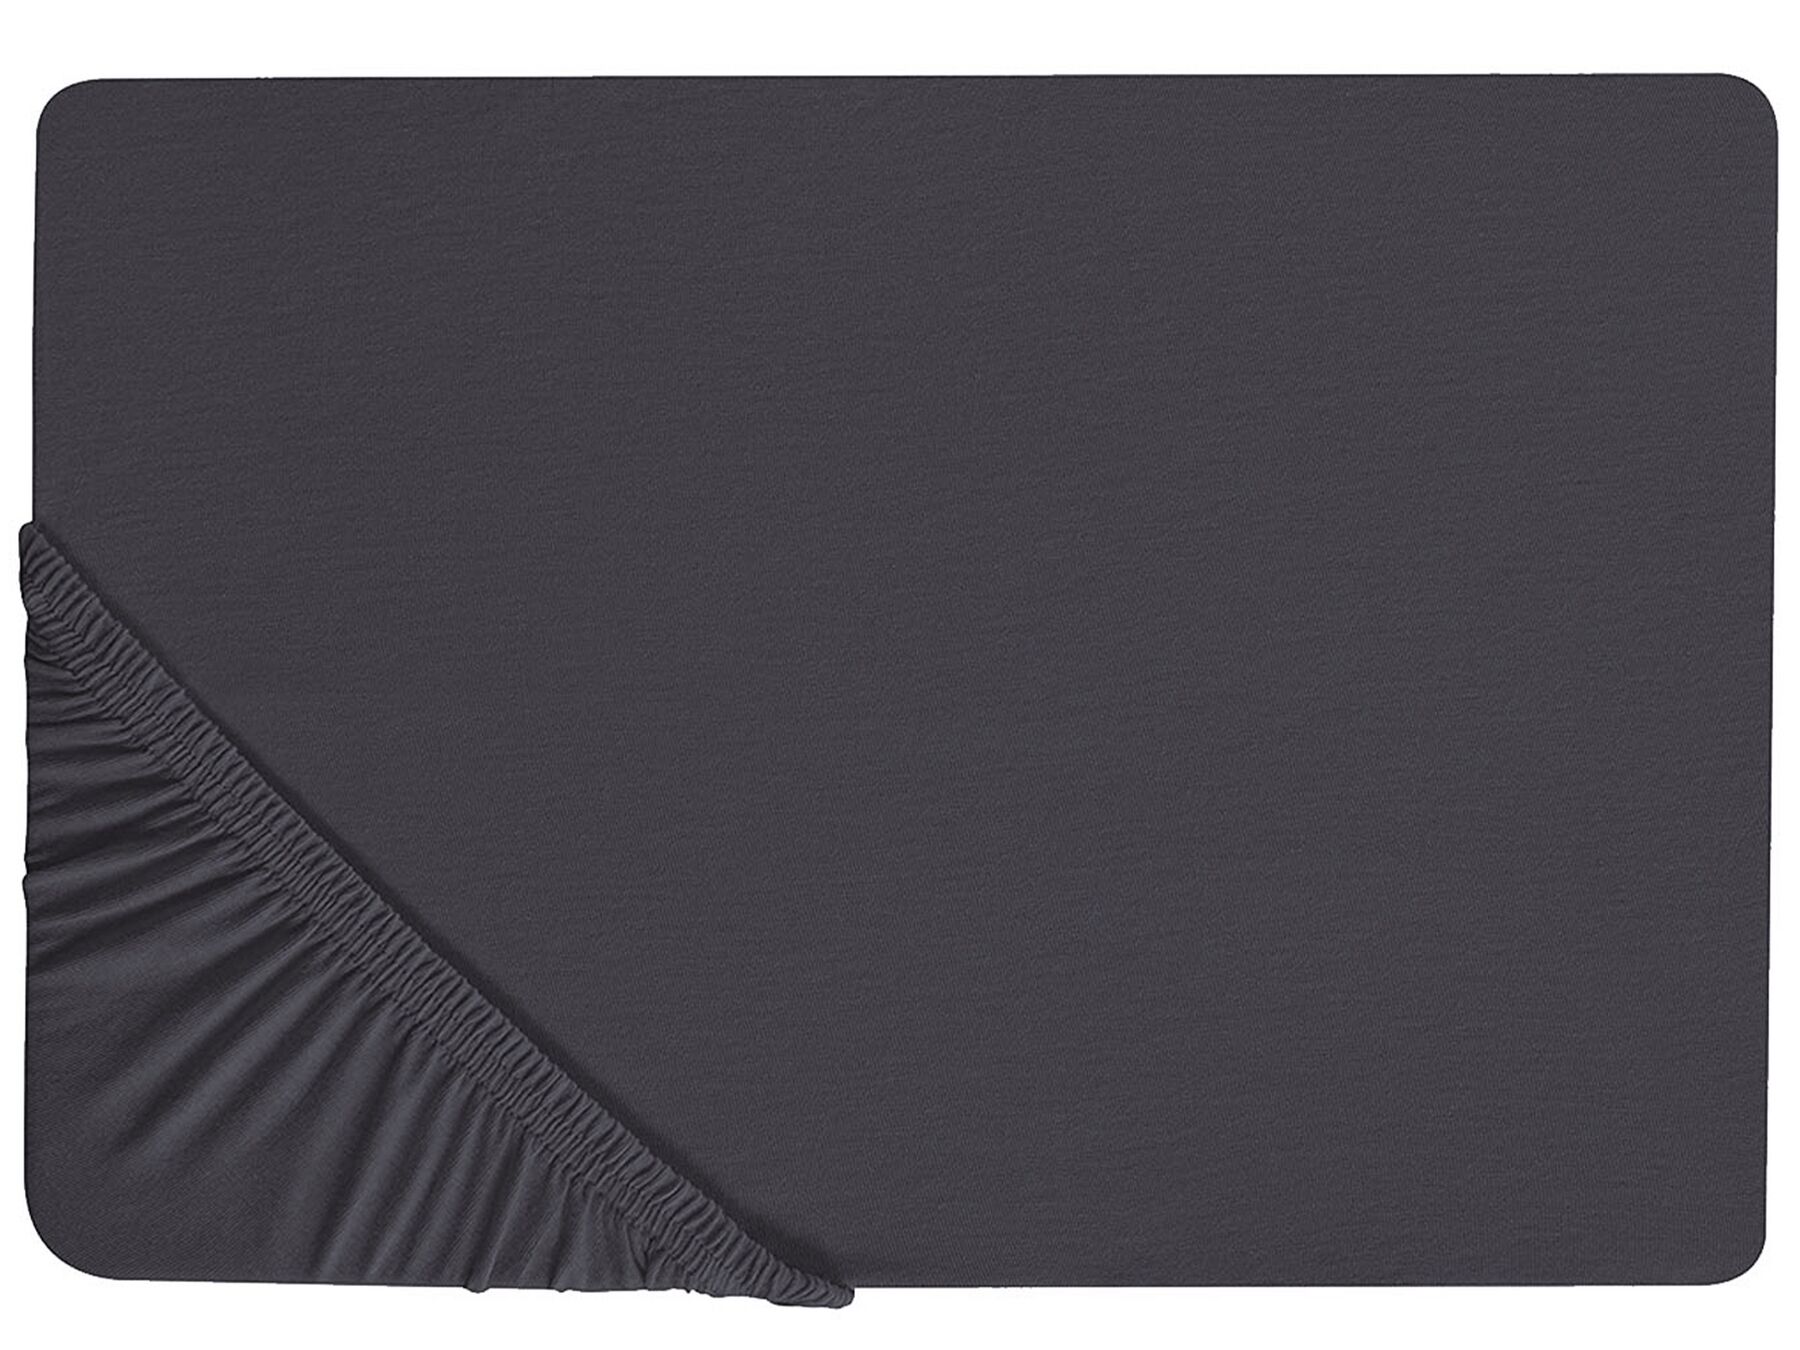 Cotton Fitted Sheet 90 x 200 cm Black HOFUF_815921